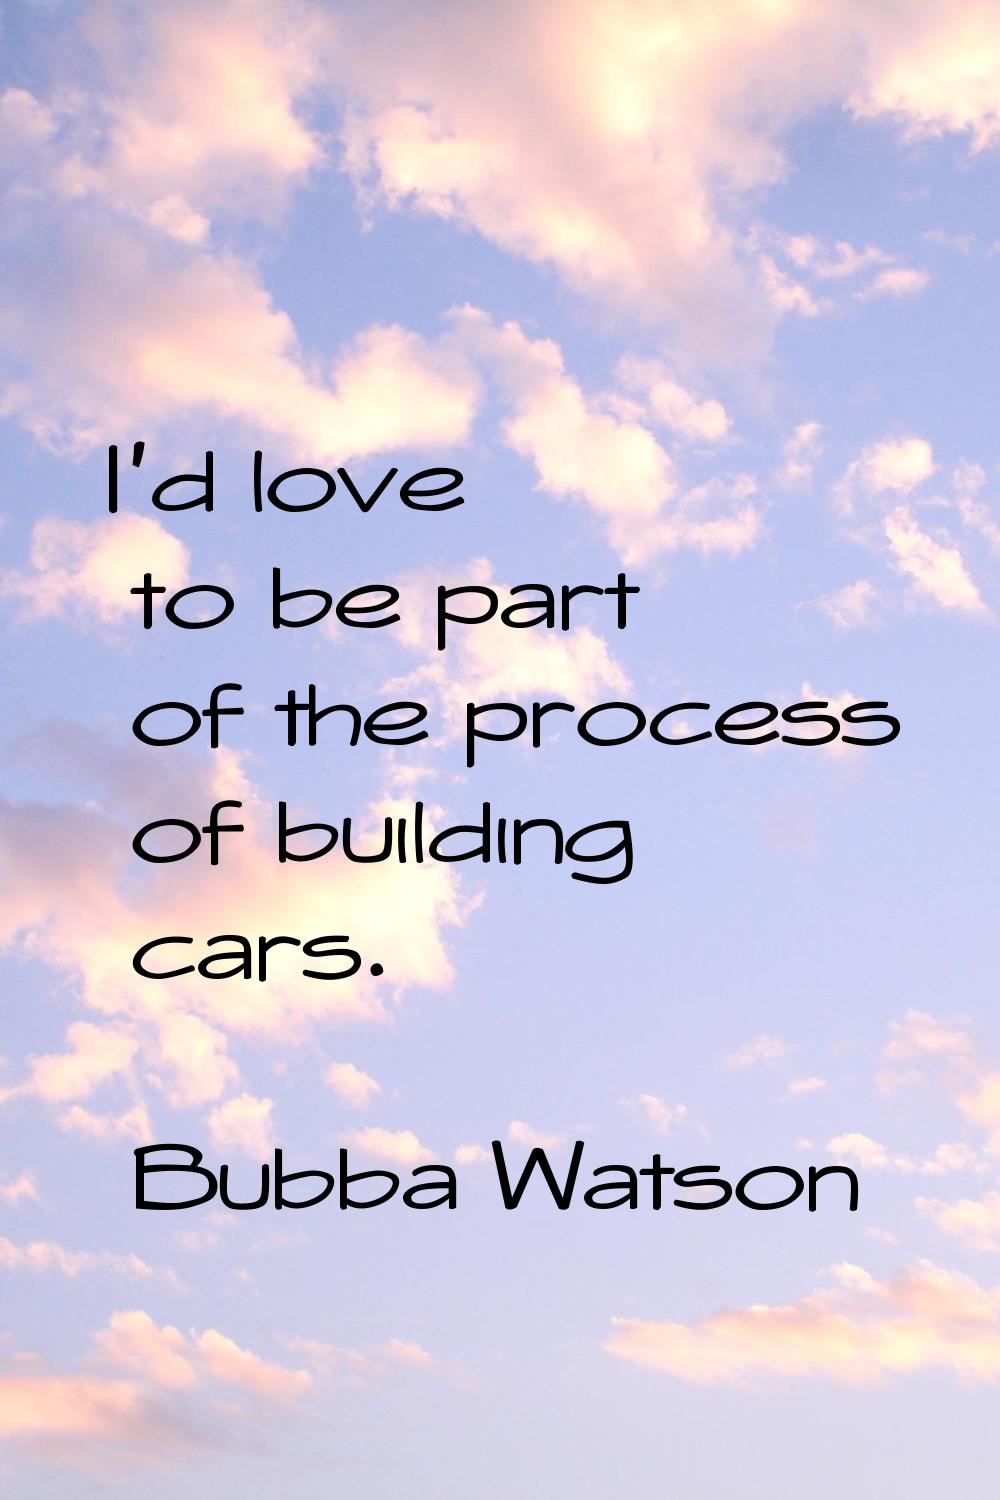 I'd love to be part of the process of building cars.